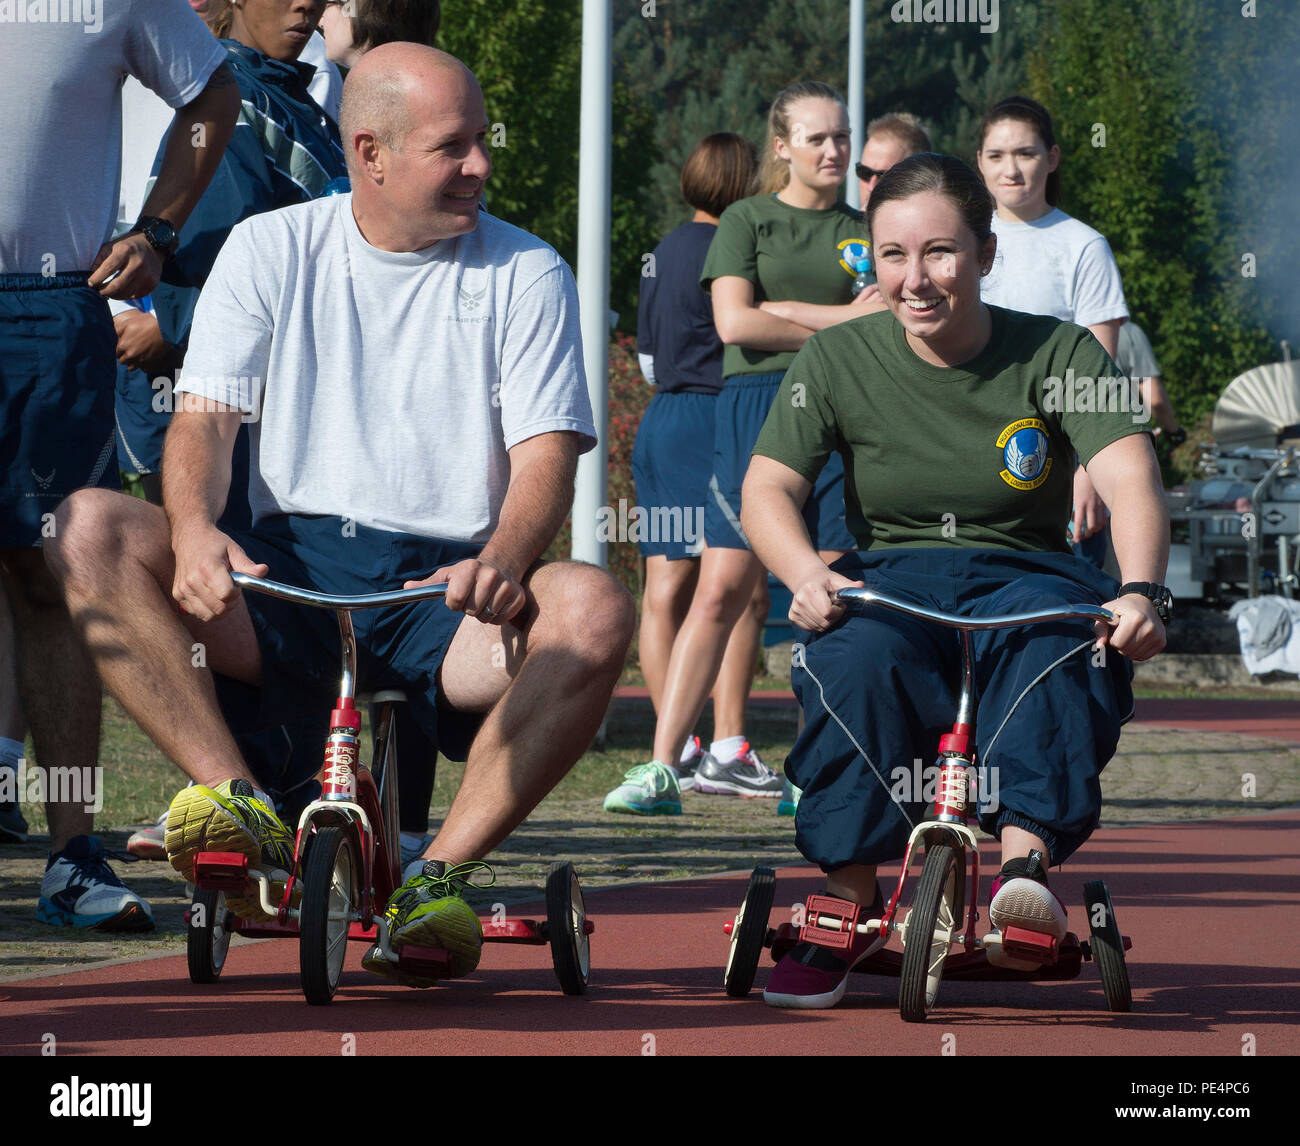 Airmen compete during a tricycle relay as part of the Commander’s Challenge Sept. 9, 2015, at Ramstein Air Base, Germany. The Commander’s Challenge gives Airmen the opportunity to build camaraderie with their co-workers and Airmen from different units as well as learn the importance of resiliency. (U.S. Air Force photo/Airman 1st Class Larissa Greatwood) Stock Photo